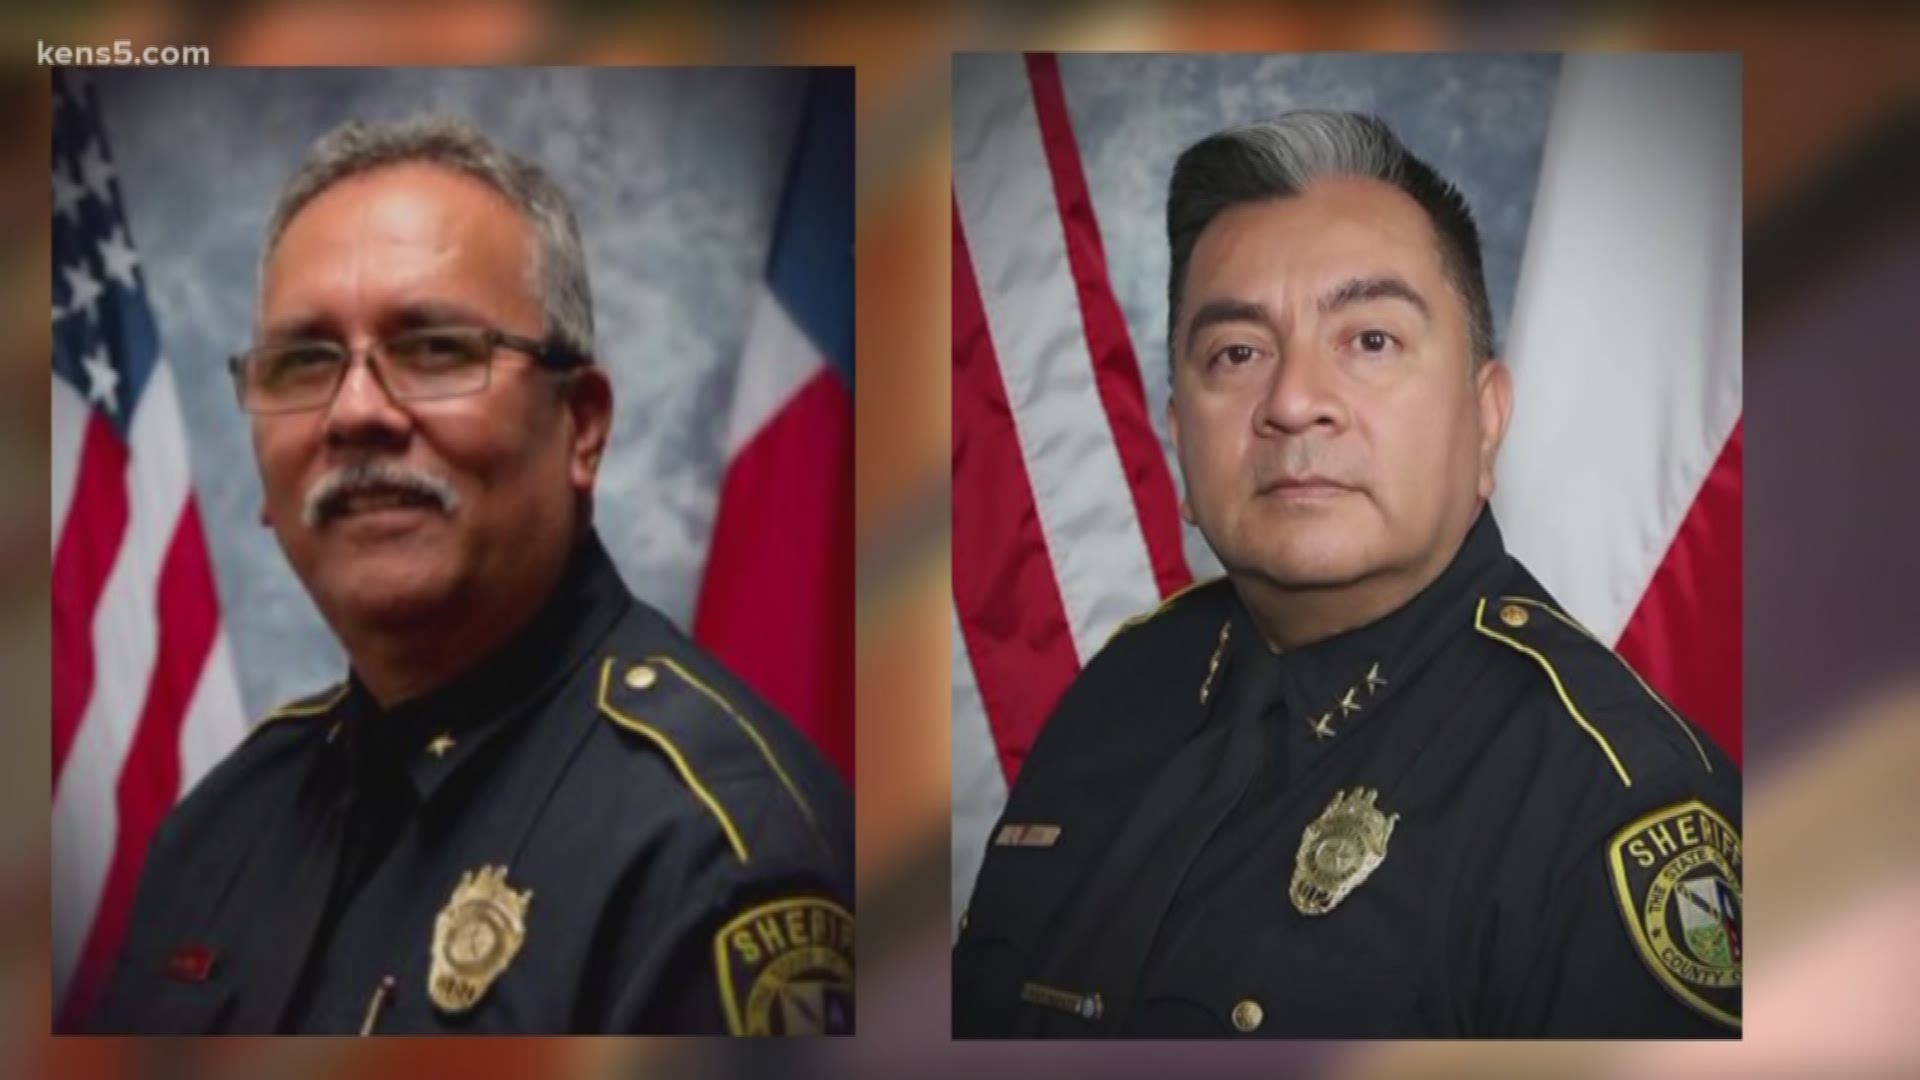 Two high-ranking Bexar County Sheriff's Office leaders were dismissed Wednesday amid tumult for the department.